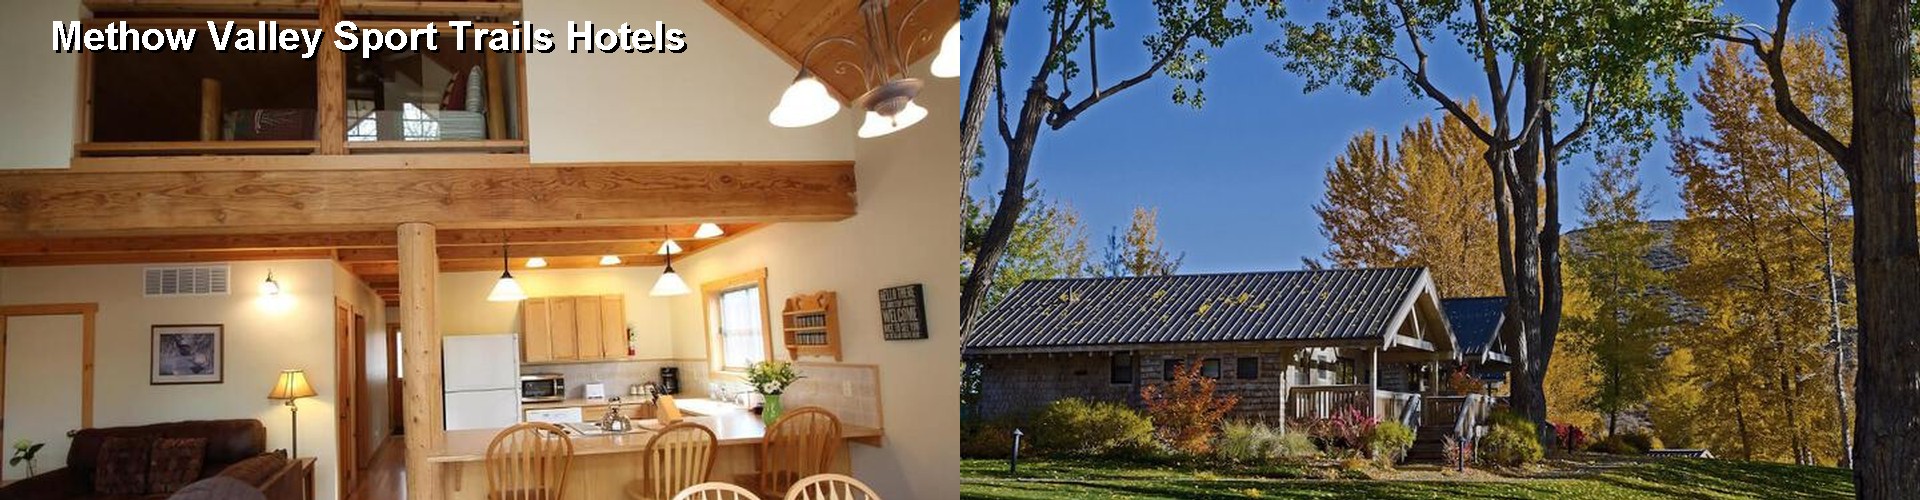 3 Best Hotels near Methow Valley Sport Trails